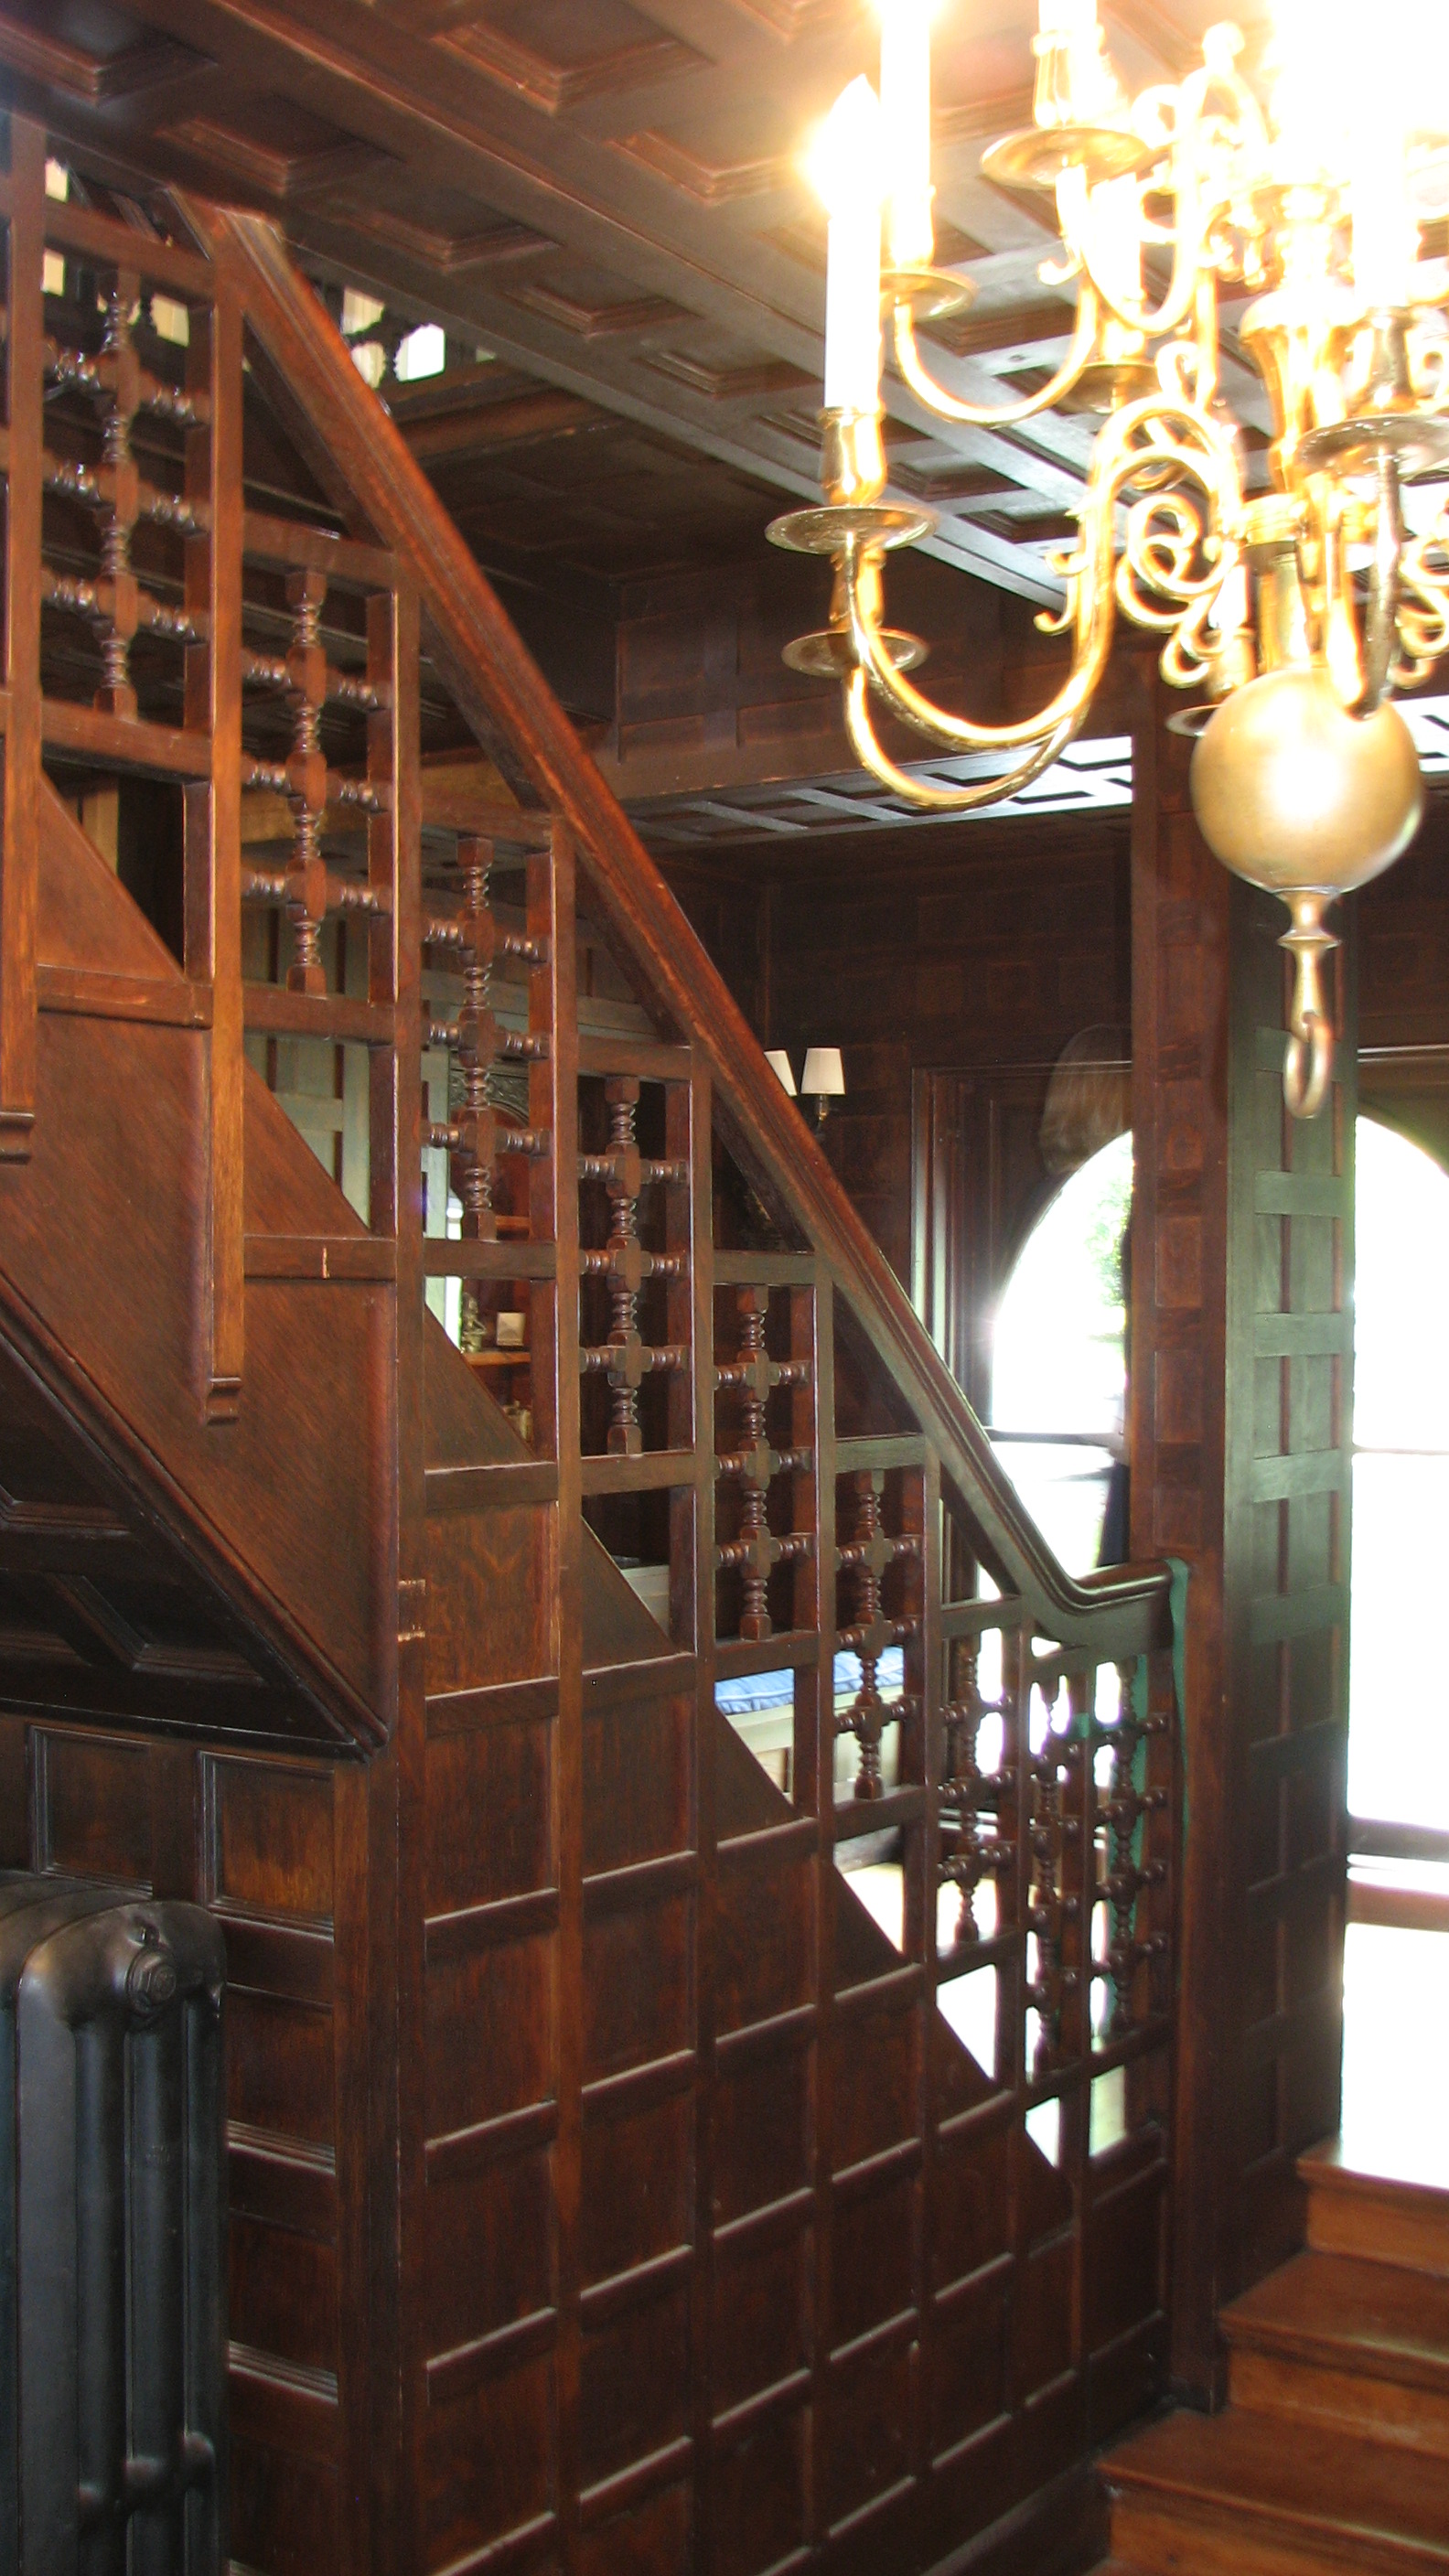 Interior details include a grand staircase and carved wood paneling